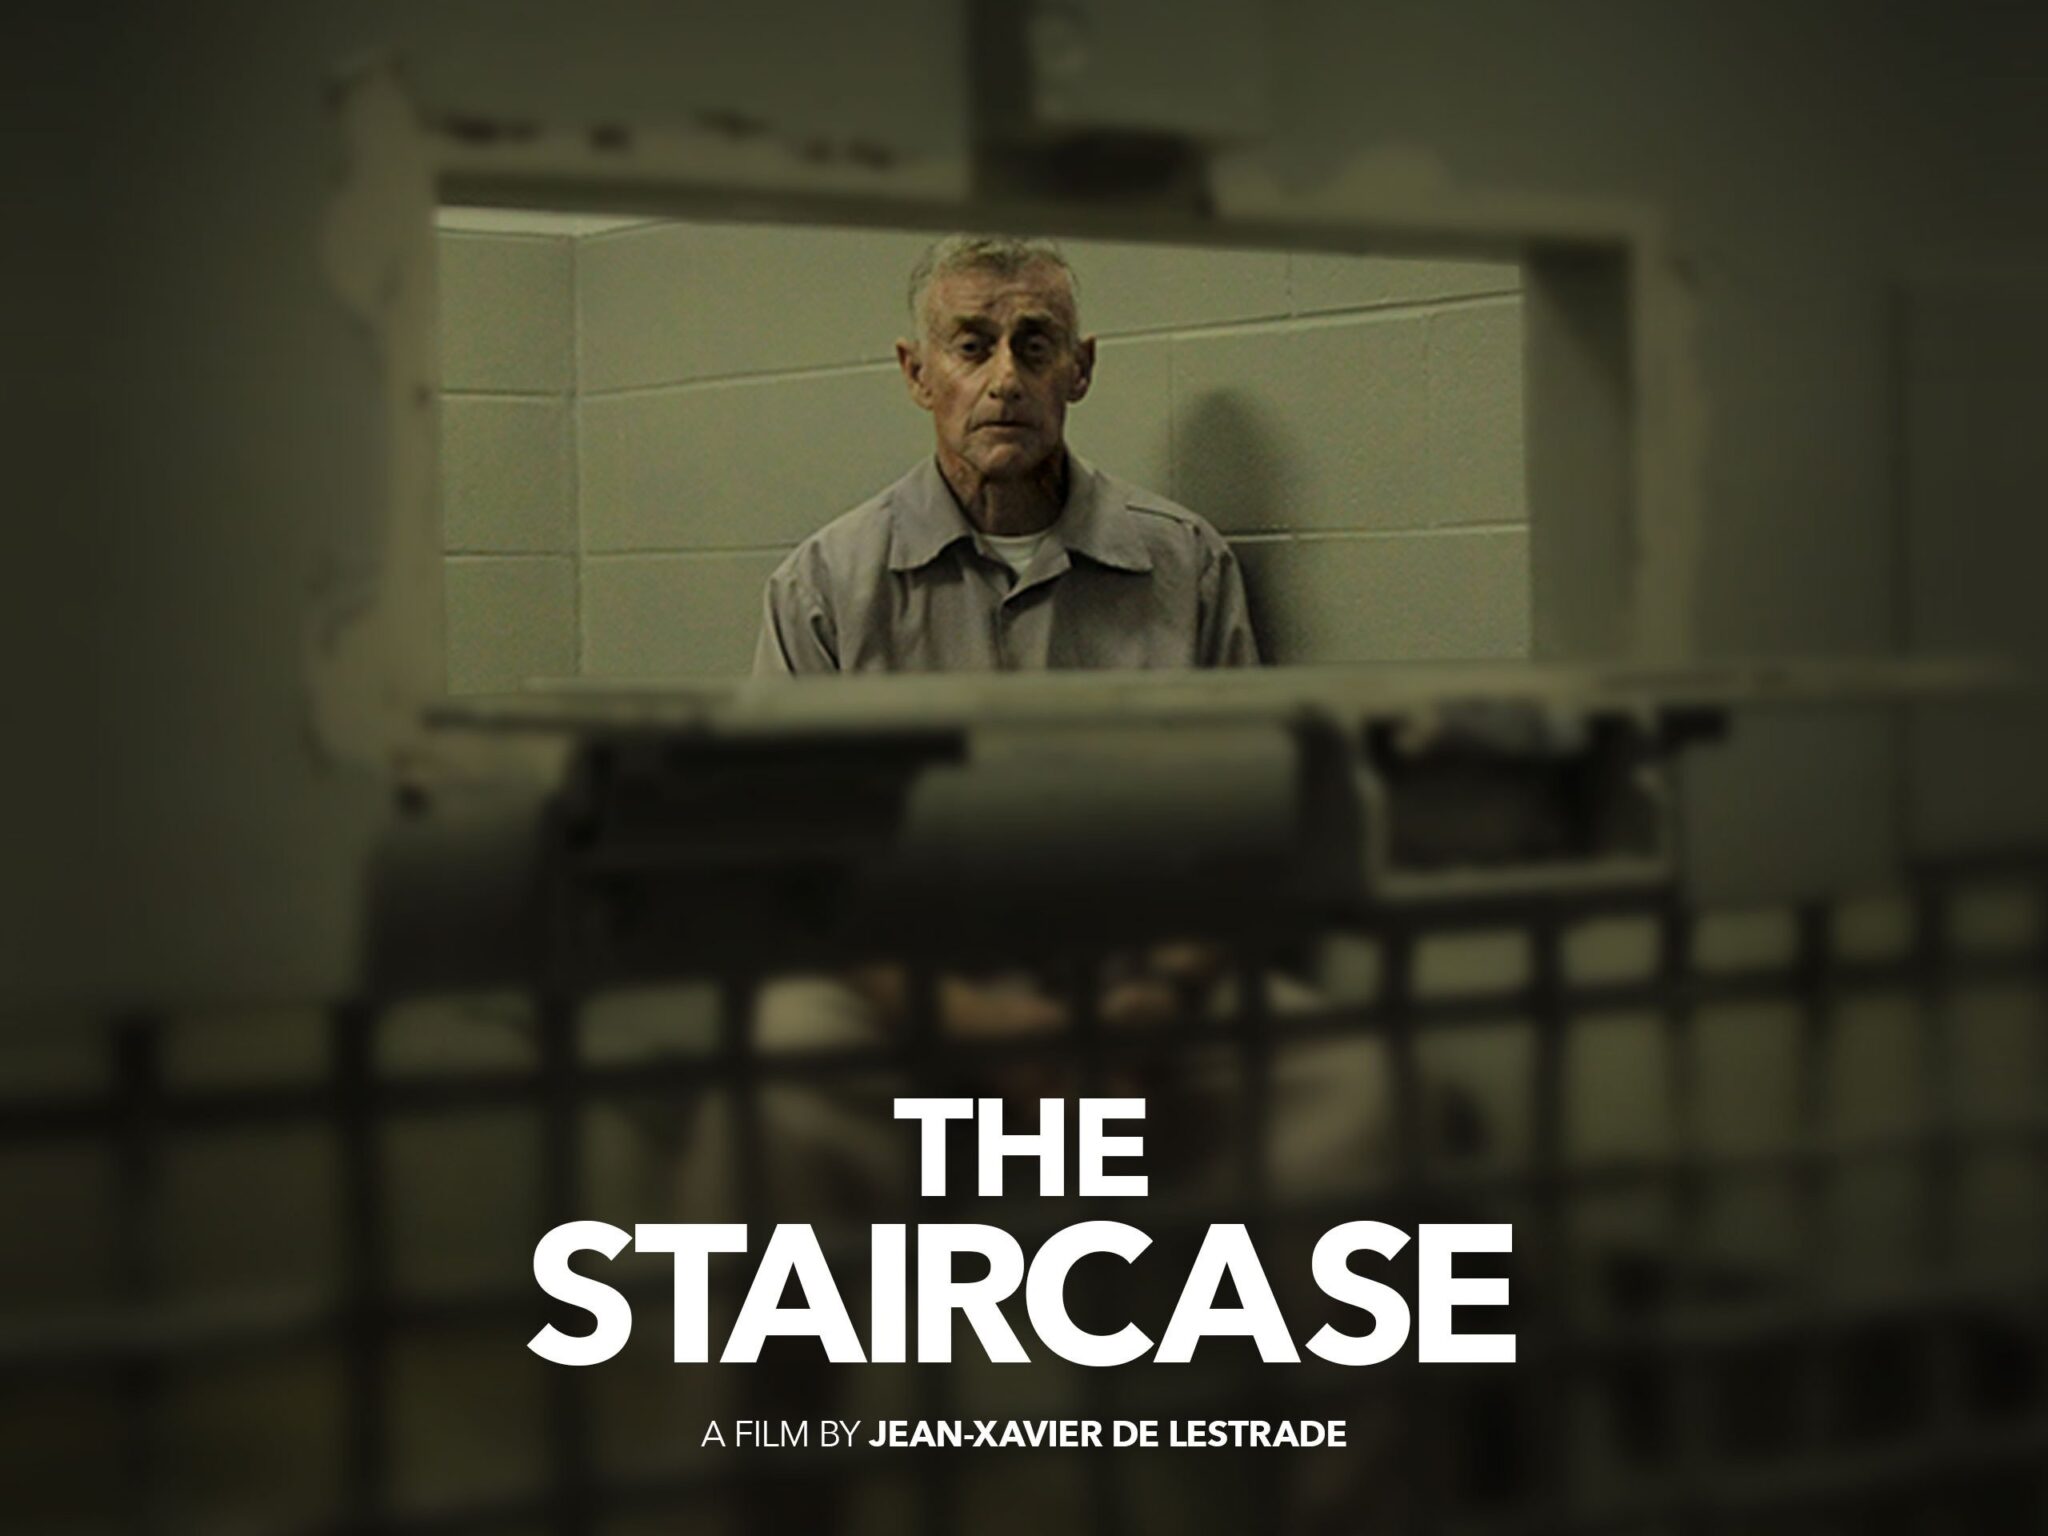 Carátula del film The staircase